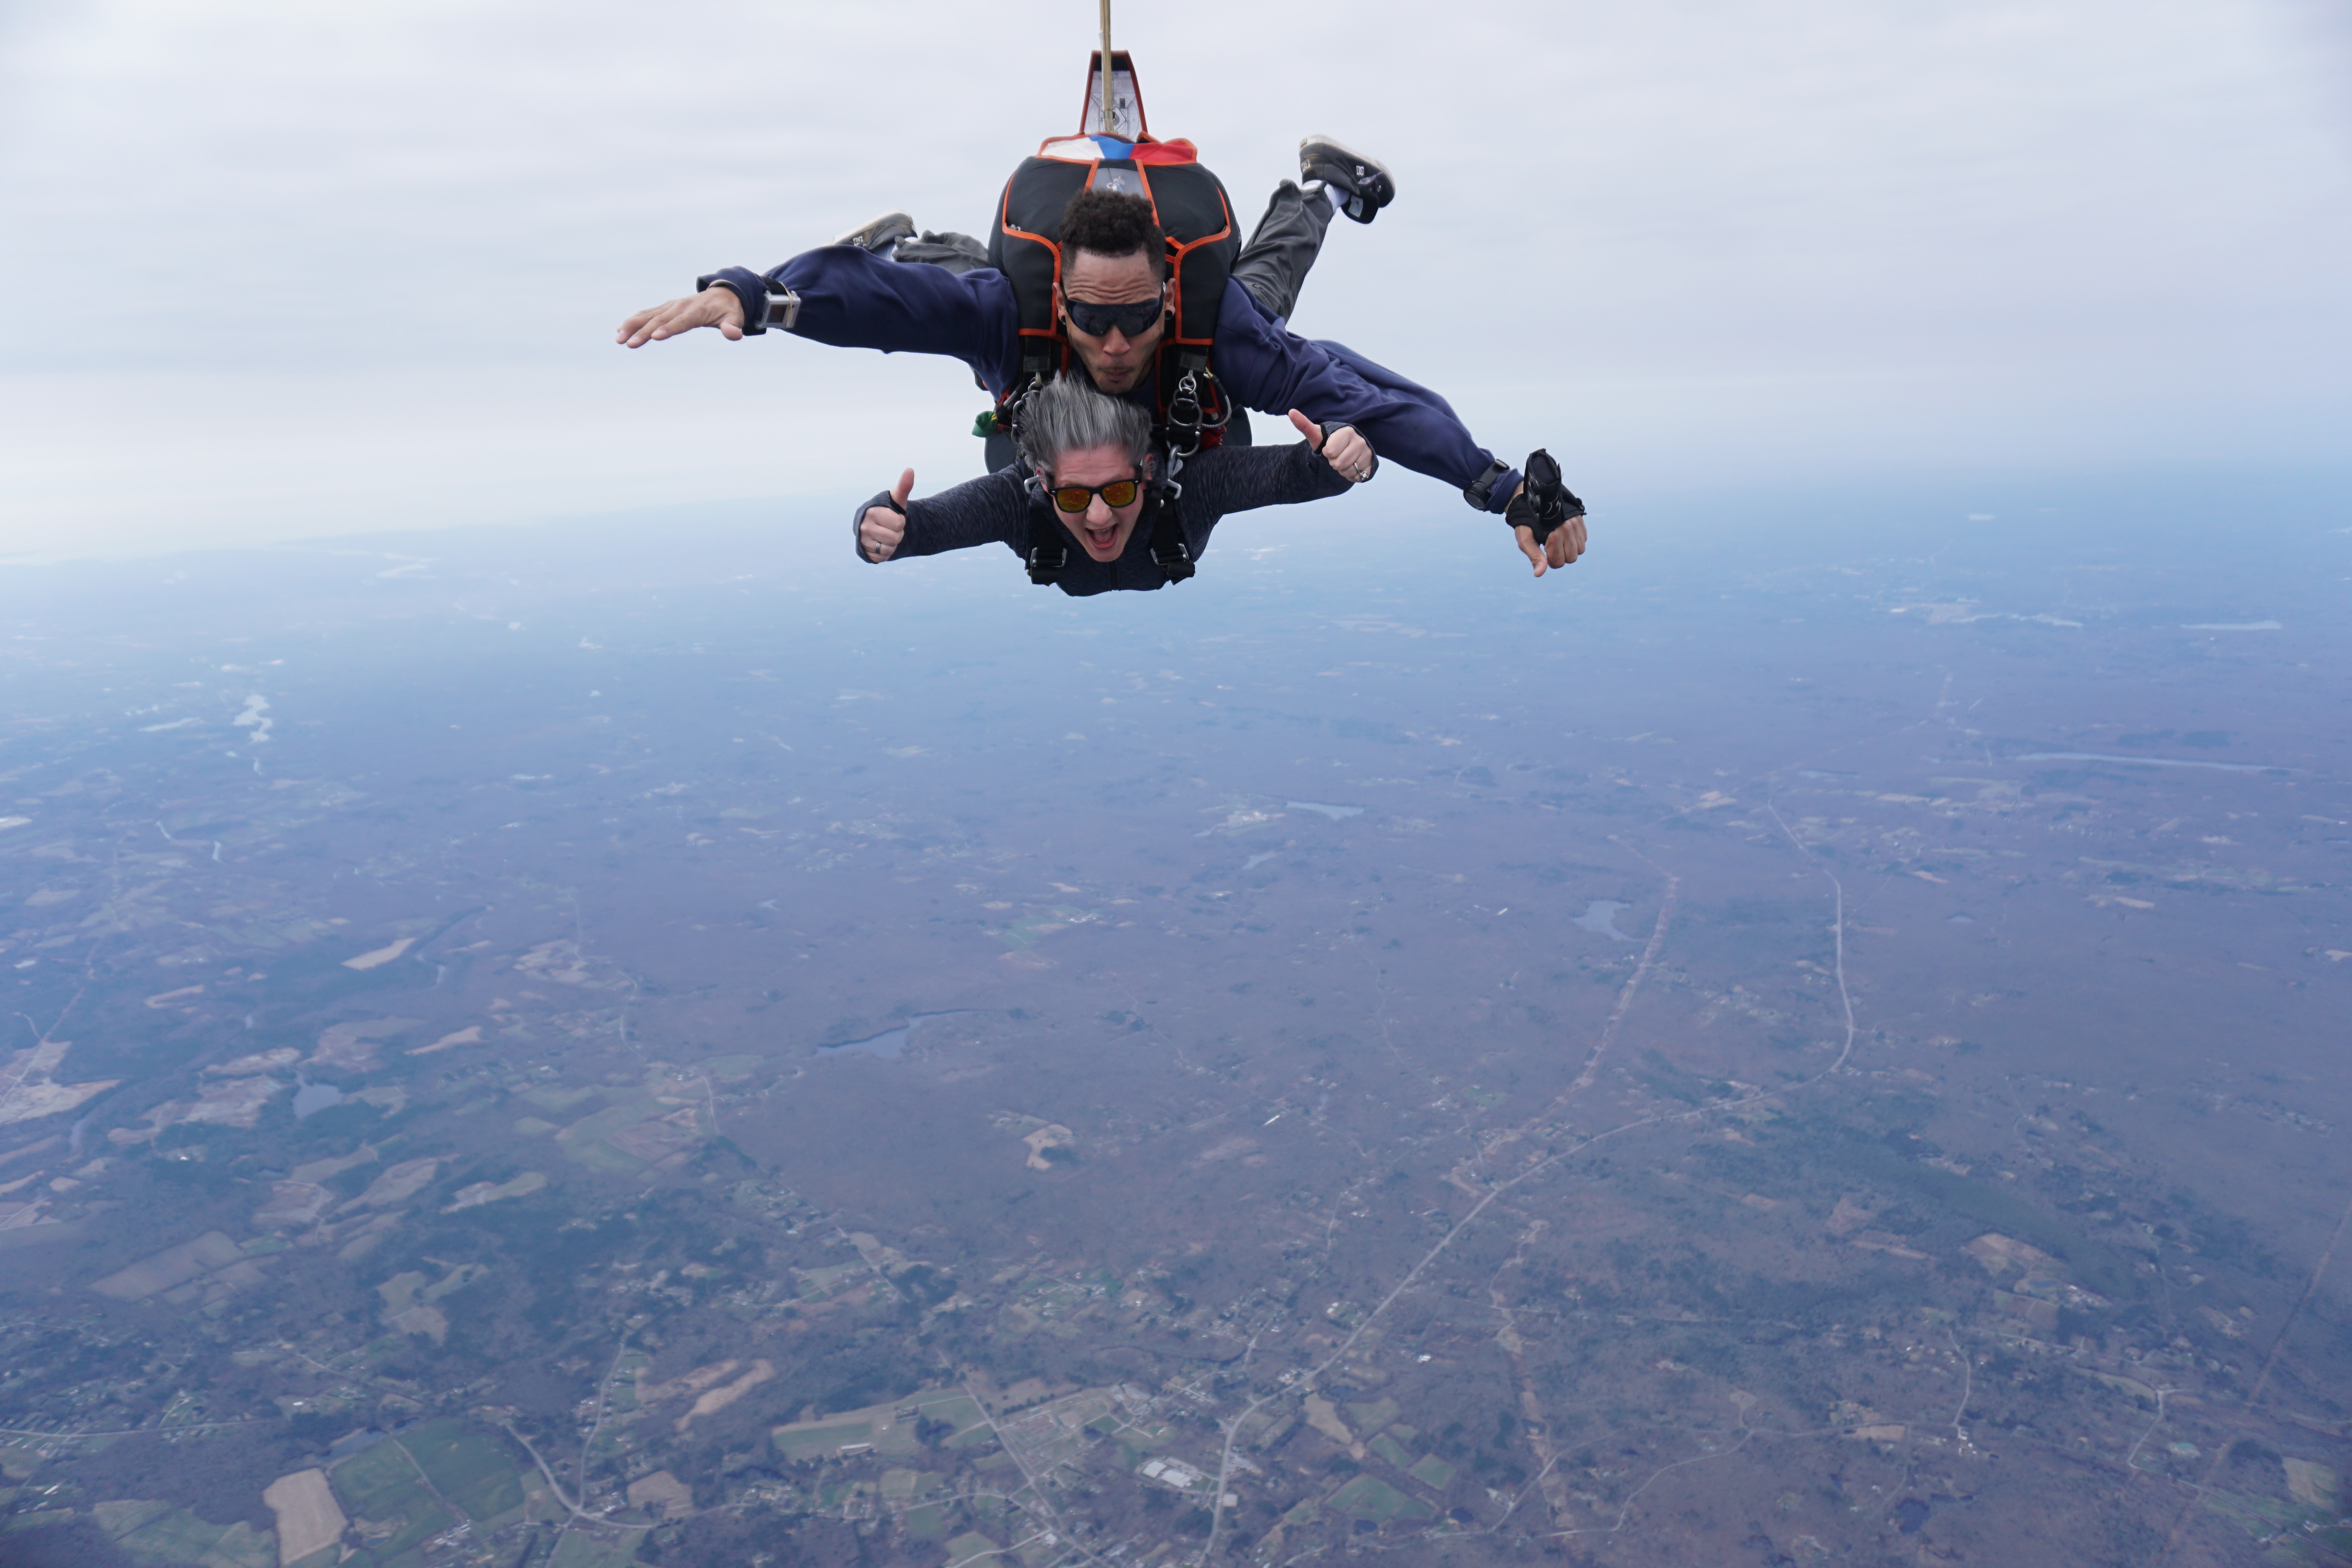 Why not do something dramatic like this sky dive for us?